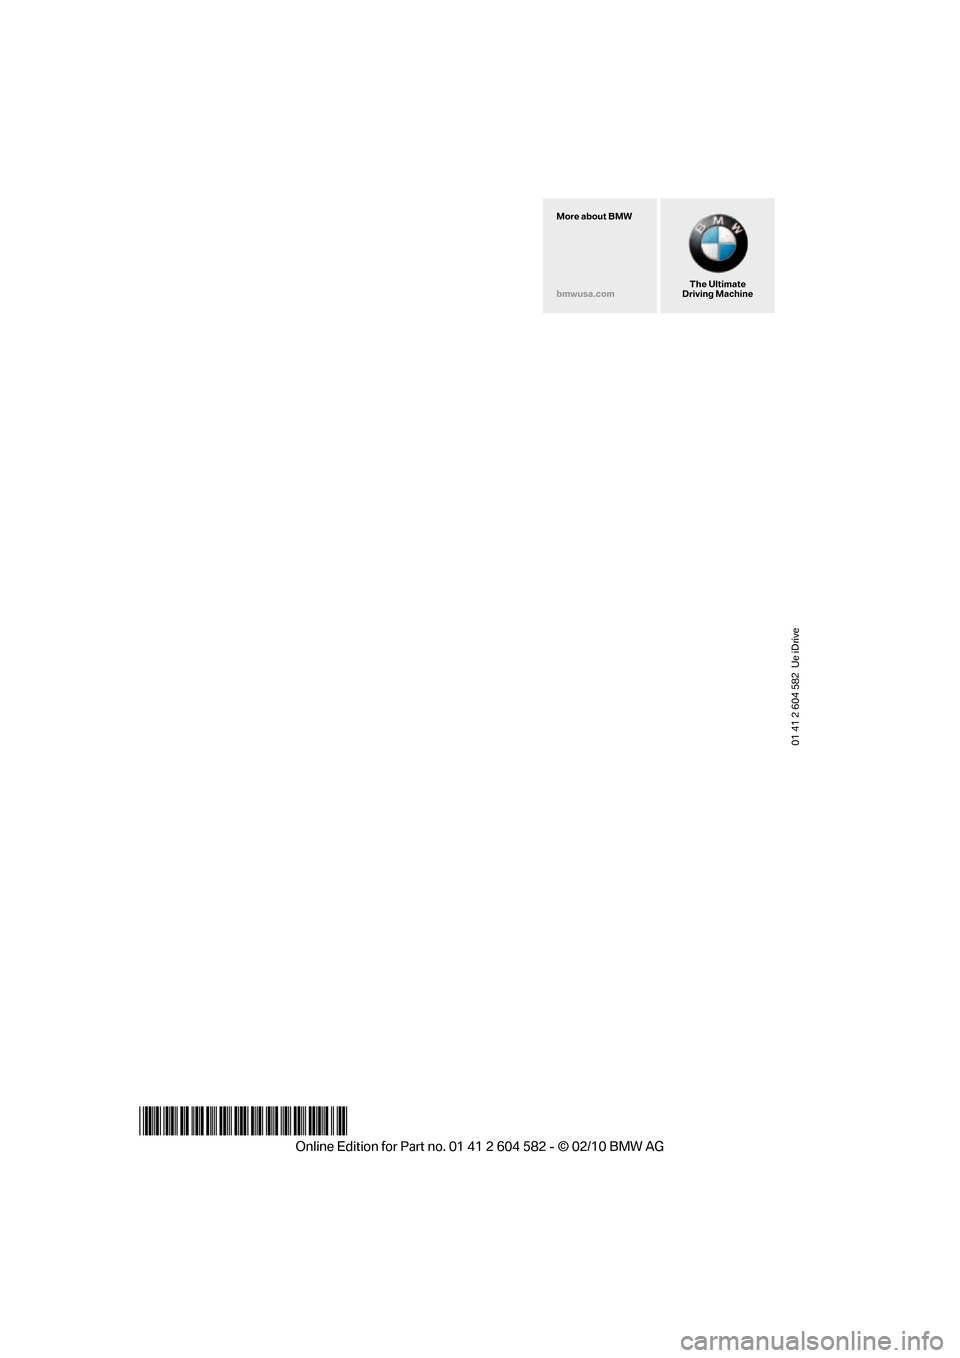 BMW 323I TOURING 2011 E91 Owners Manual 01 41 2 604 582  Ue iDrive
*BL260458200R*
The Ultimate
Driving Machine More about BMW
bmwusa.com 